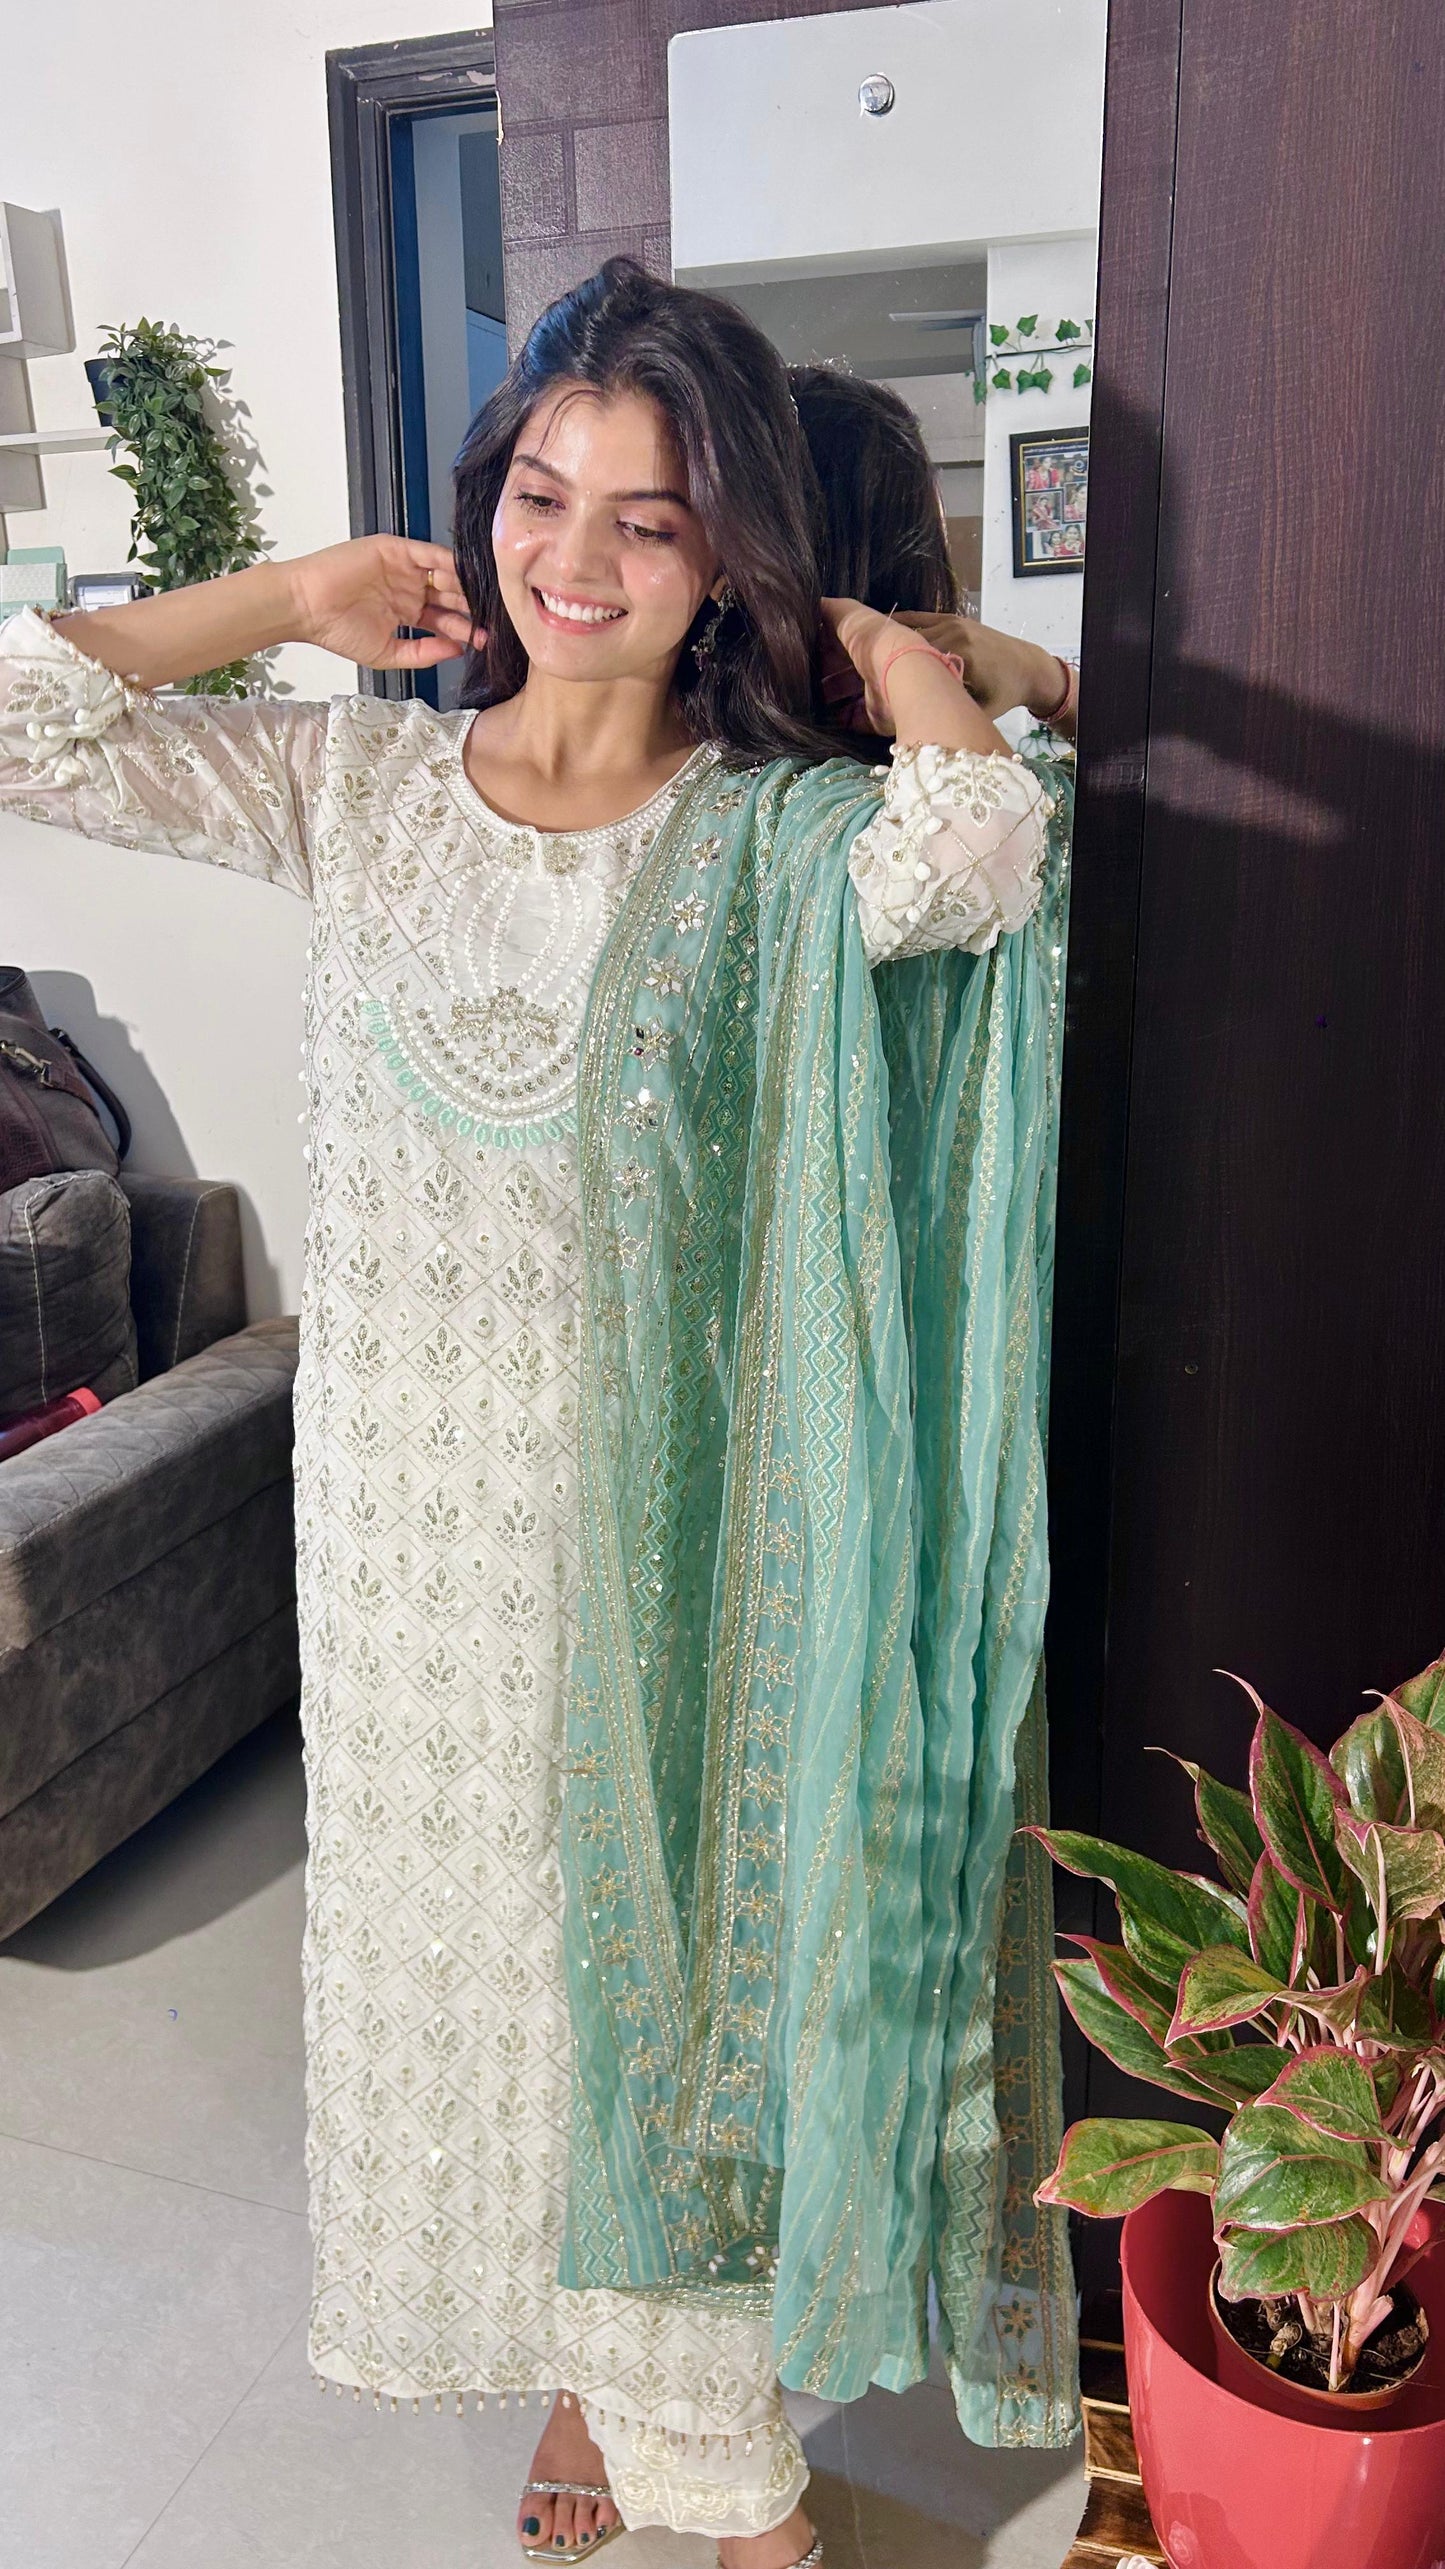 Glittering Charm: Georgette Sequined Embroidered Top and Pant Set with Green Dupatta - Inayakhan Shop 